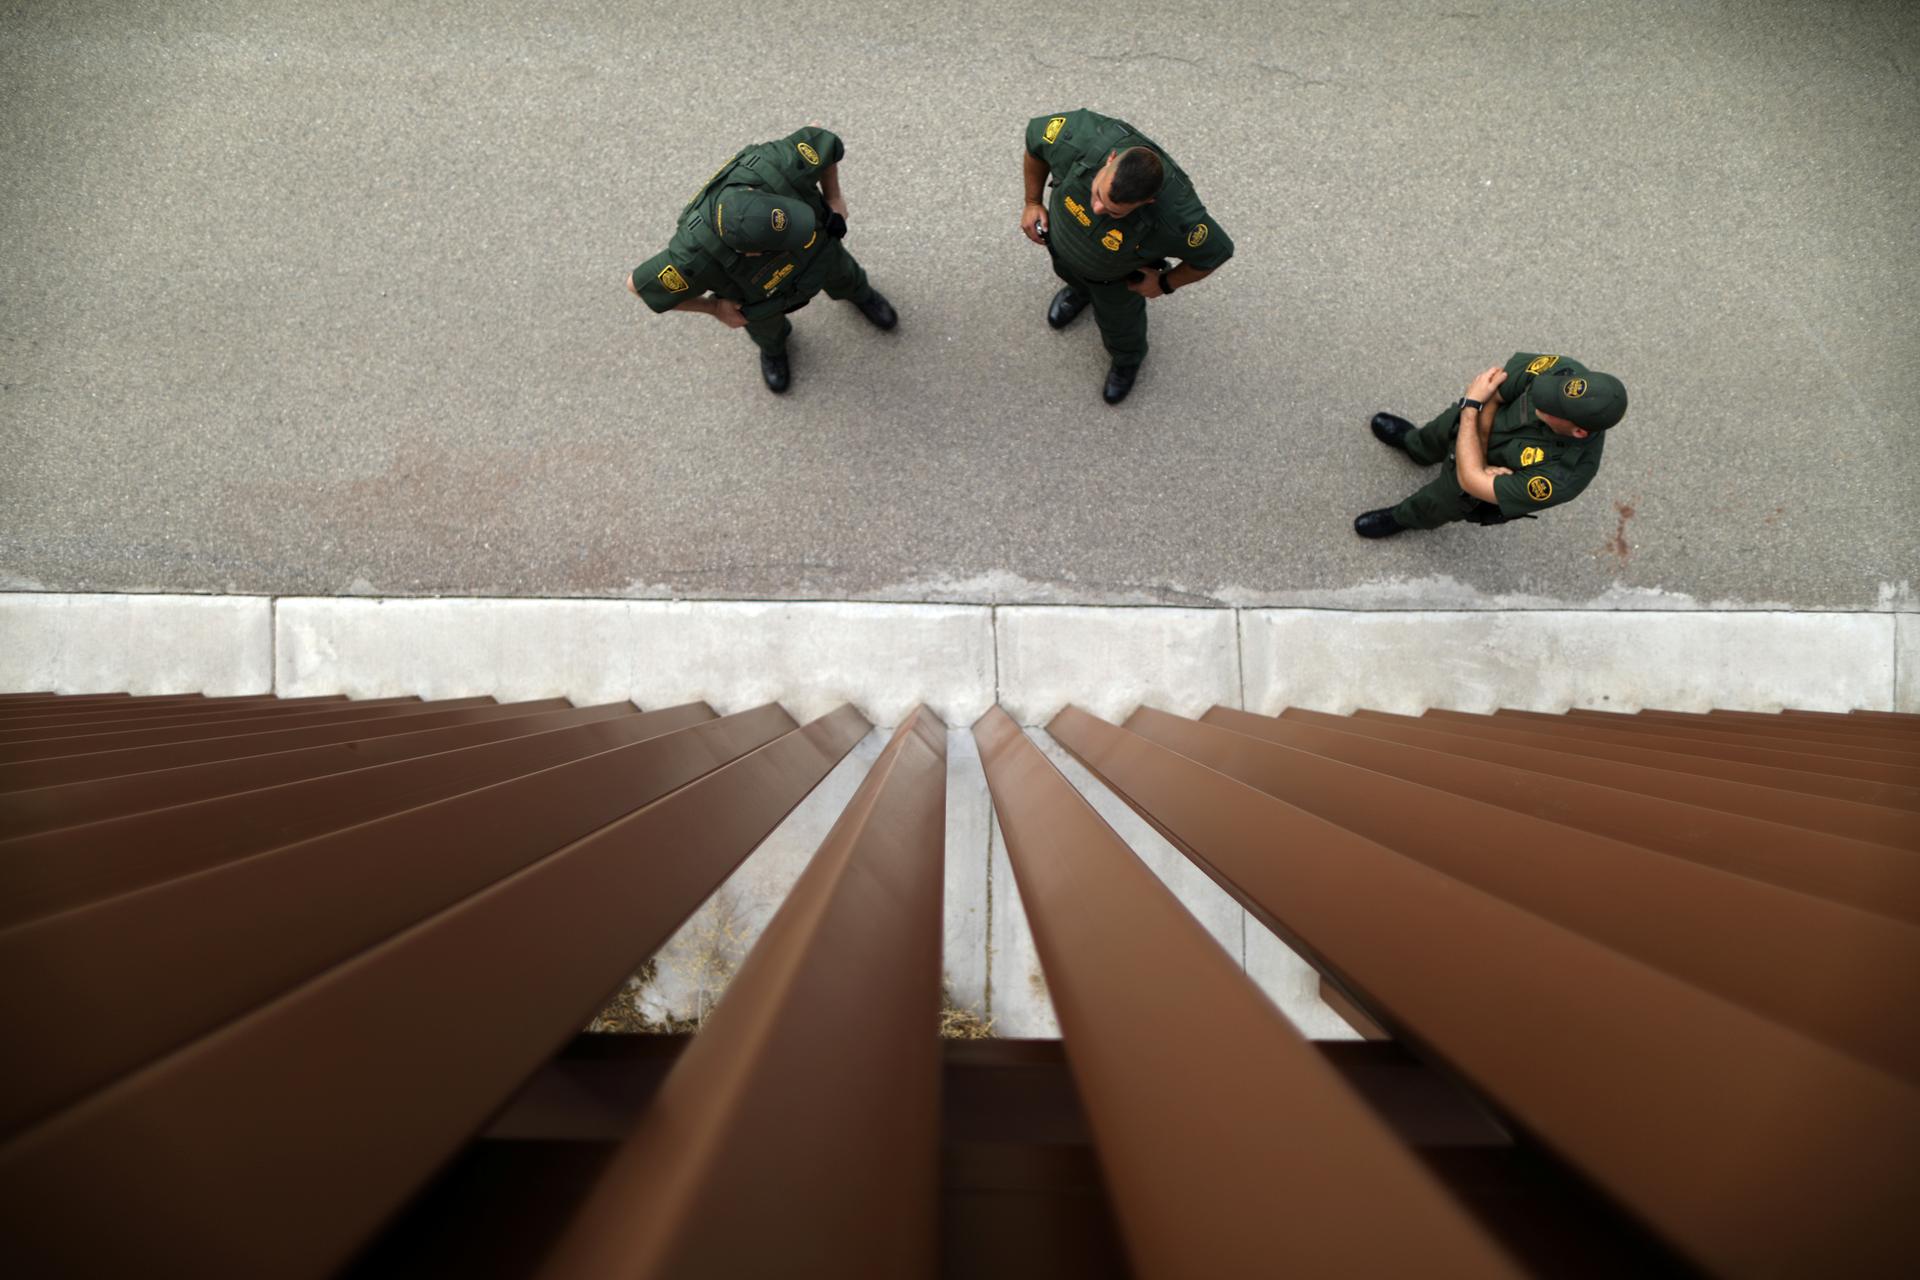 Border patrol agents stand next to a border fence used for training at the United States Border Patrol Academy in Artesia, New Mexico, June 8, 2017.